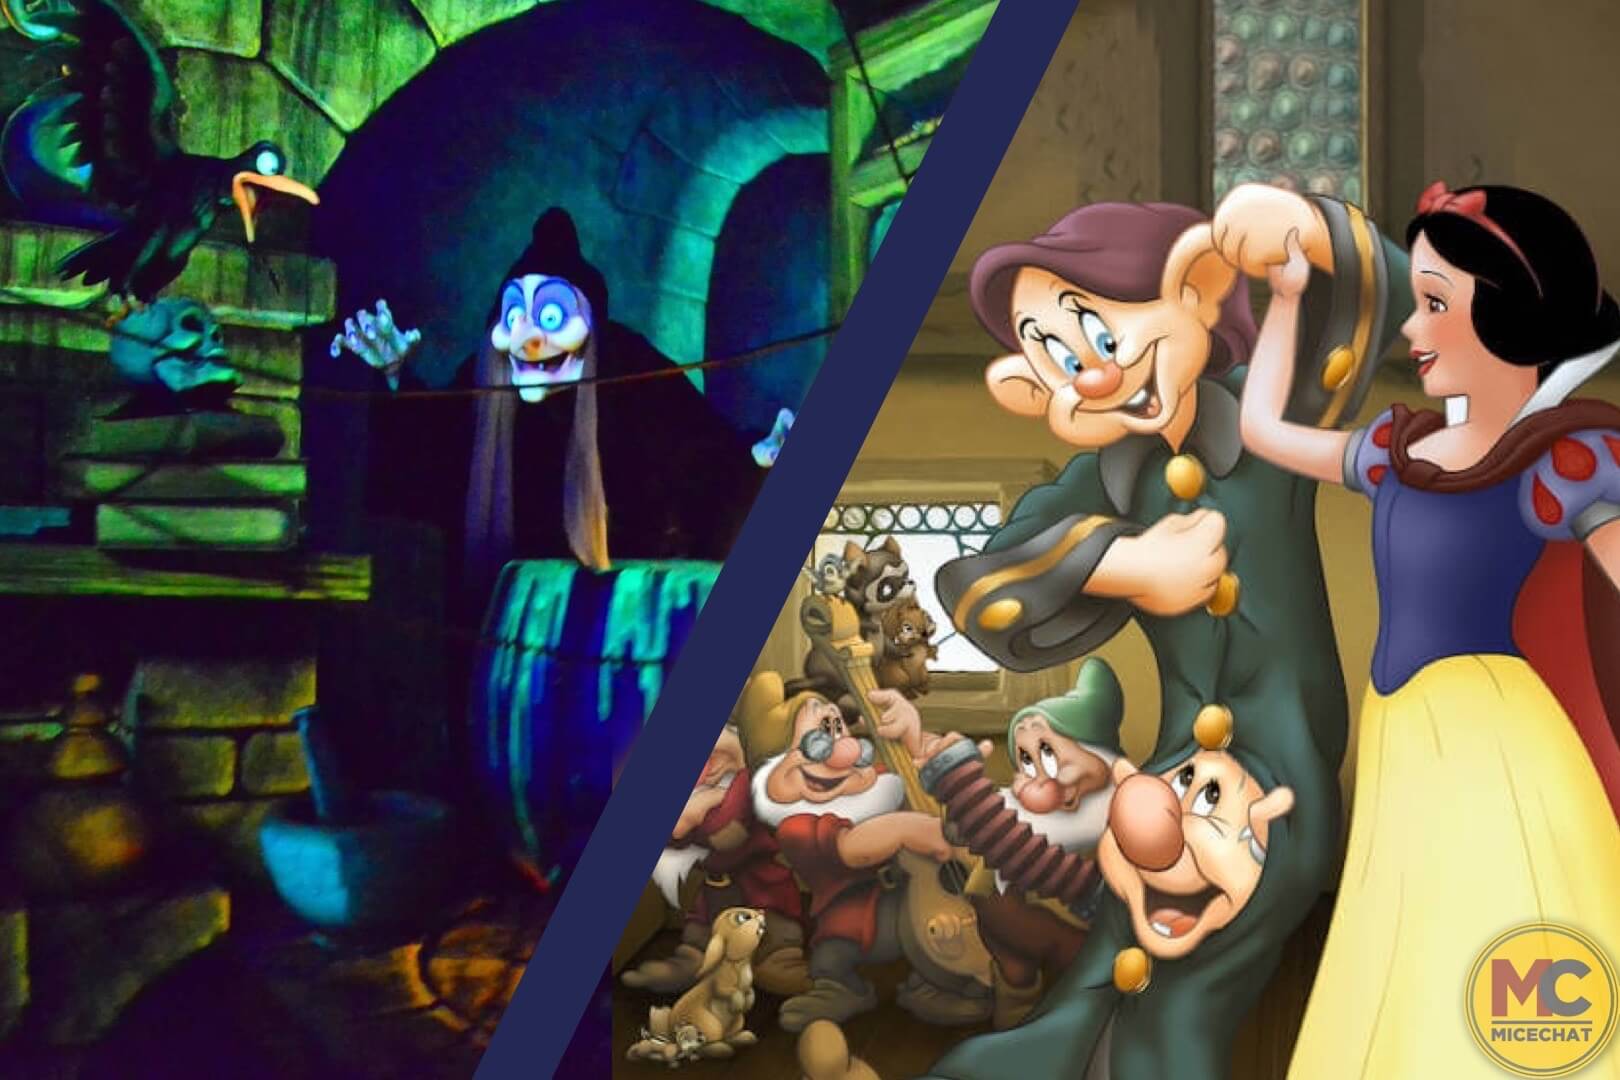 Disneyland's Snow White - The Journey From Scary to Merry